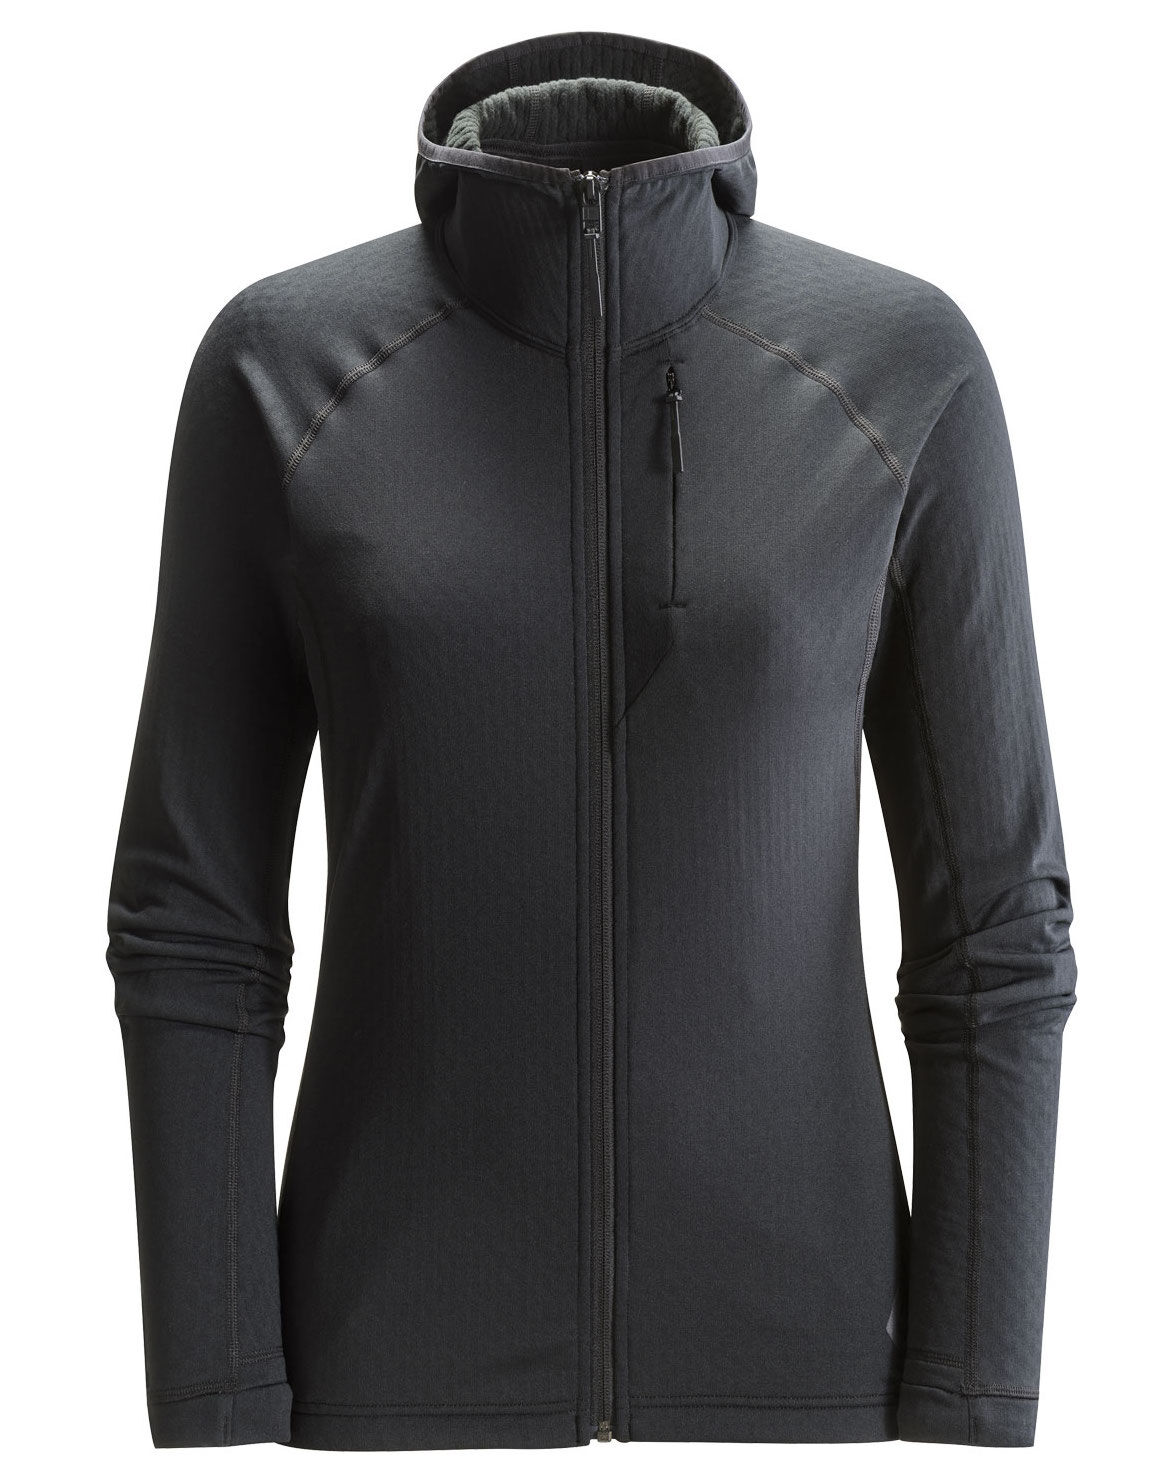 Black Diamond - Coefficient Jacket Hoody - Giacca in pile - Donna